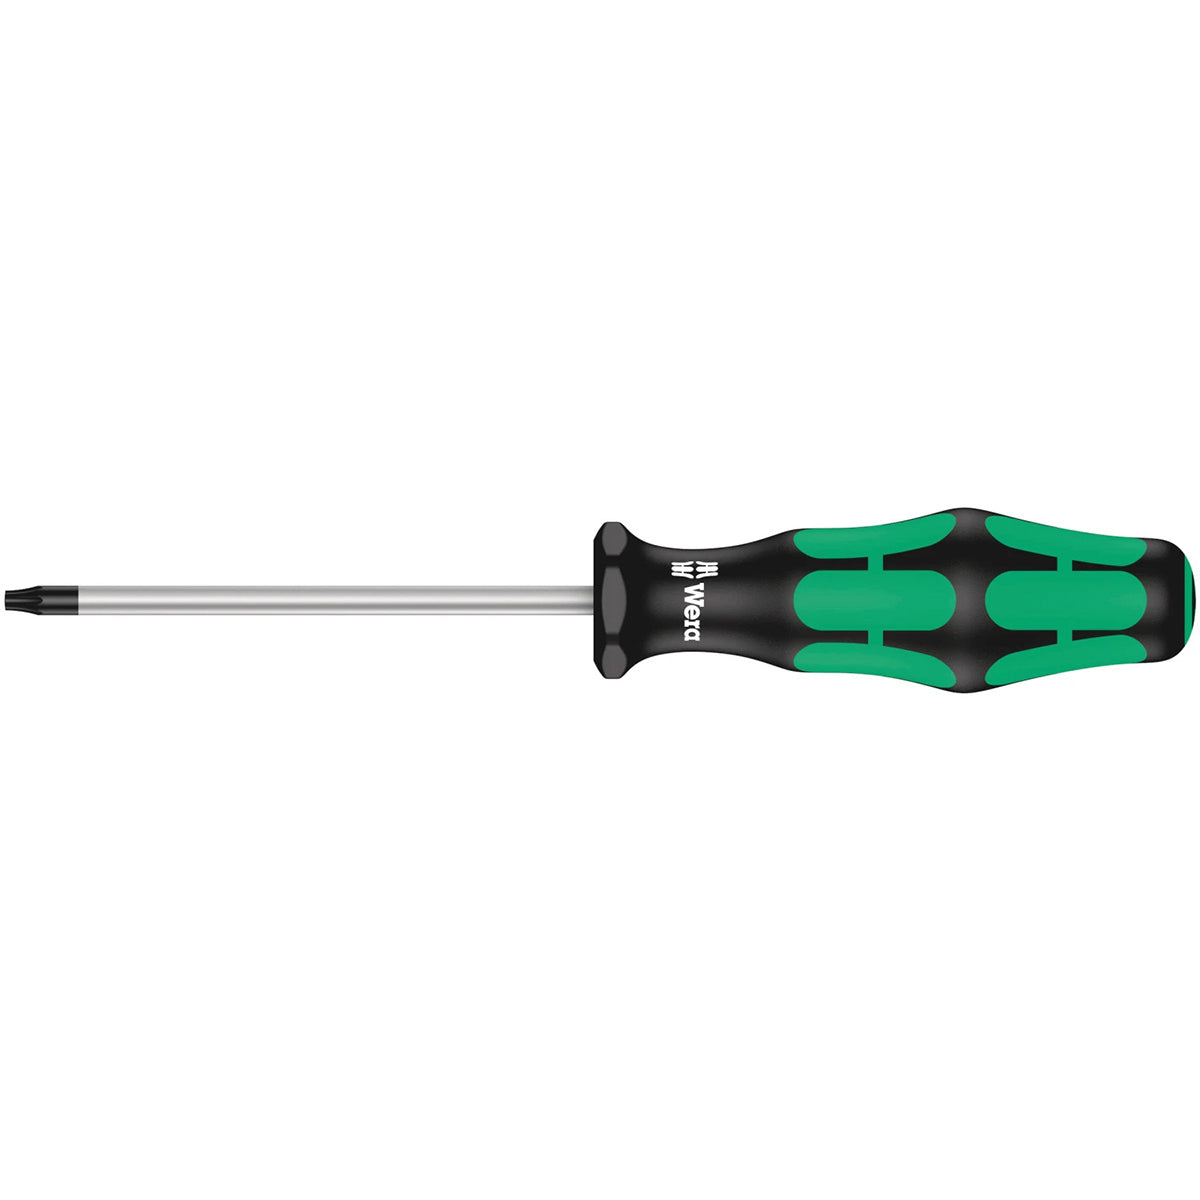 Wera 367 Torx HF Individual Torx Screwdriver With Holding Function - T10